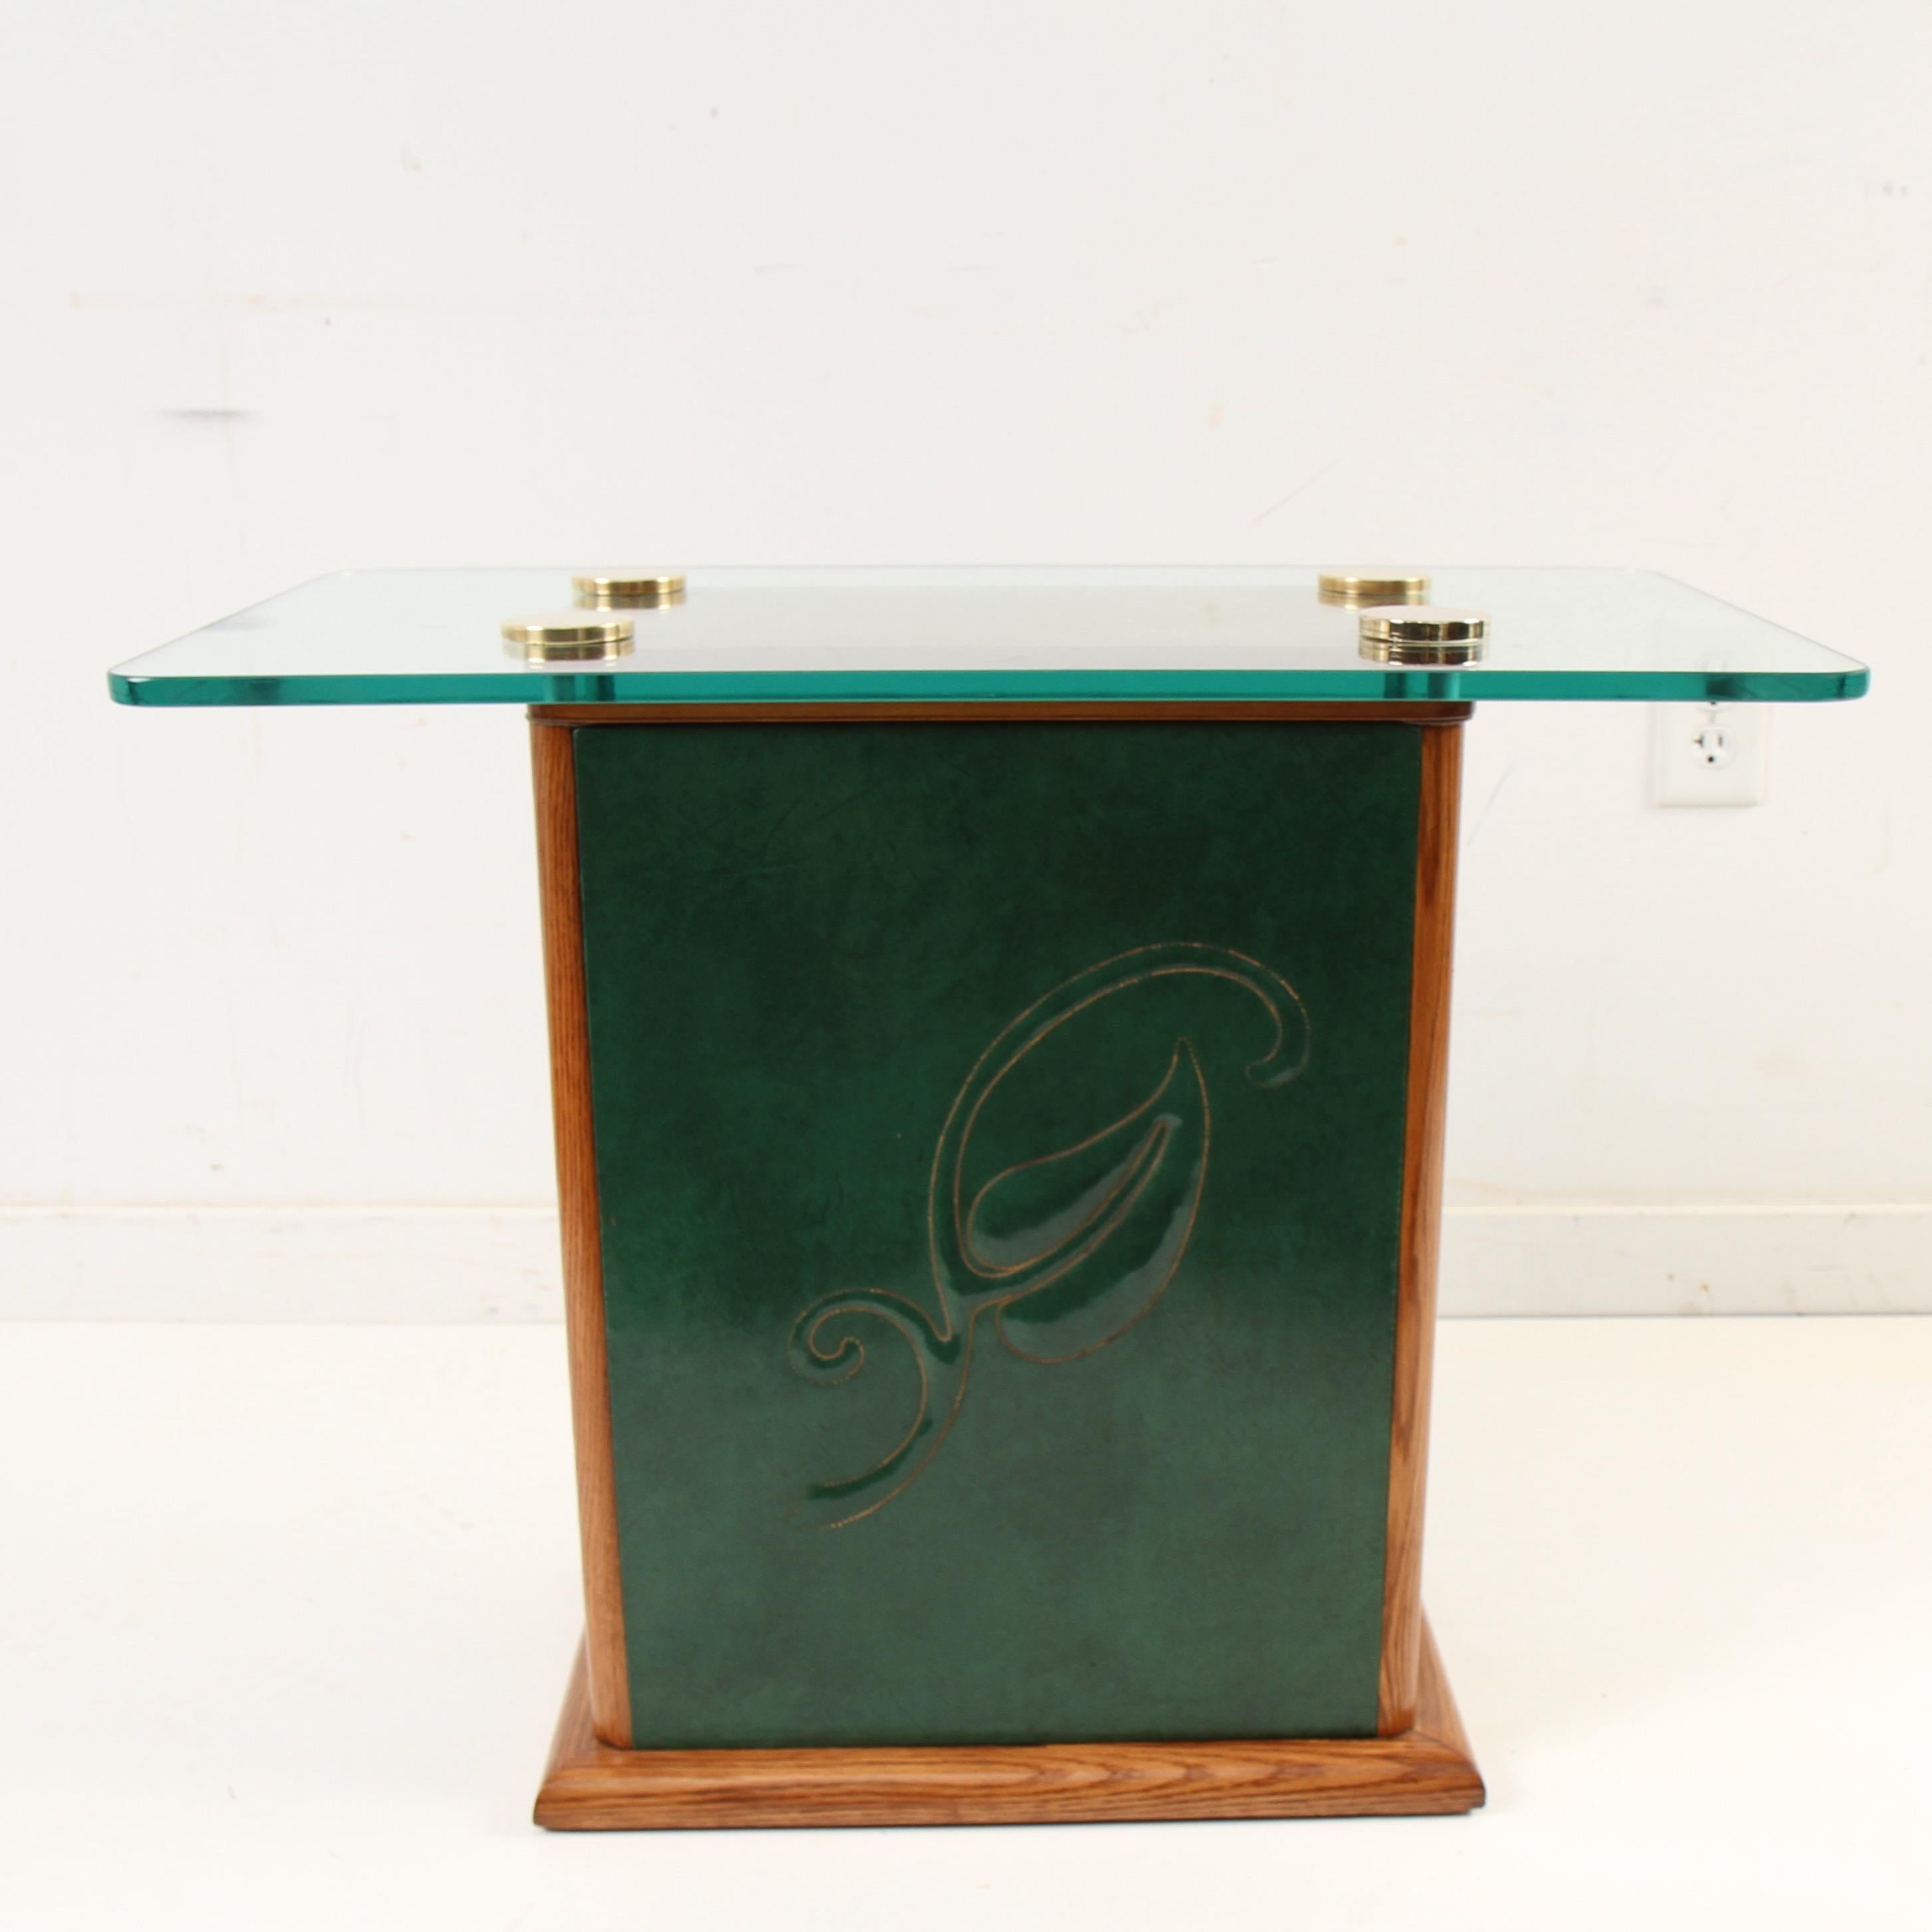 1940s era side or center table with walnut stained oak trim around green, embossed-leather sided base with glass top, secured with solid brass glass tabletop adapters. 

'I CAN DESIGN A CHAIR, A table, a couch, a desk, to fit any curve, crevice or